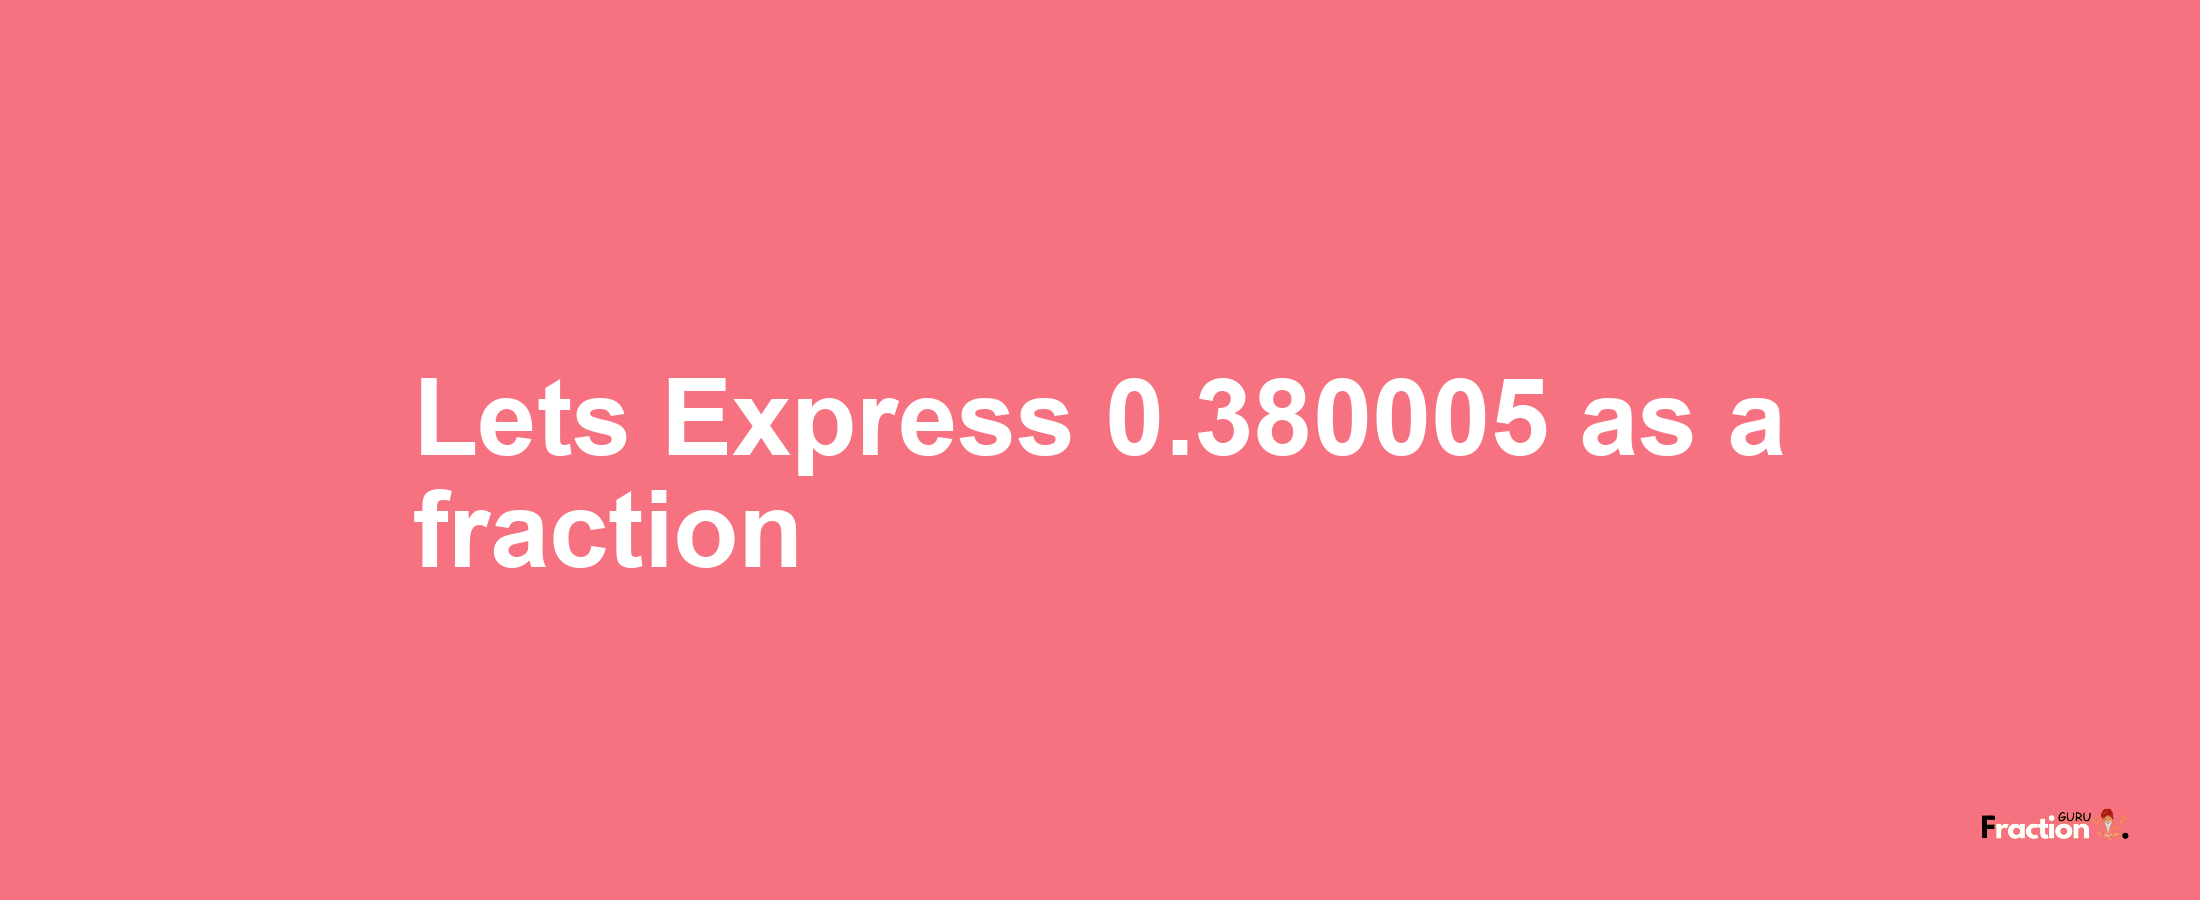 Lets Express 0.380005 as afraction